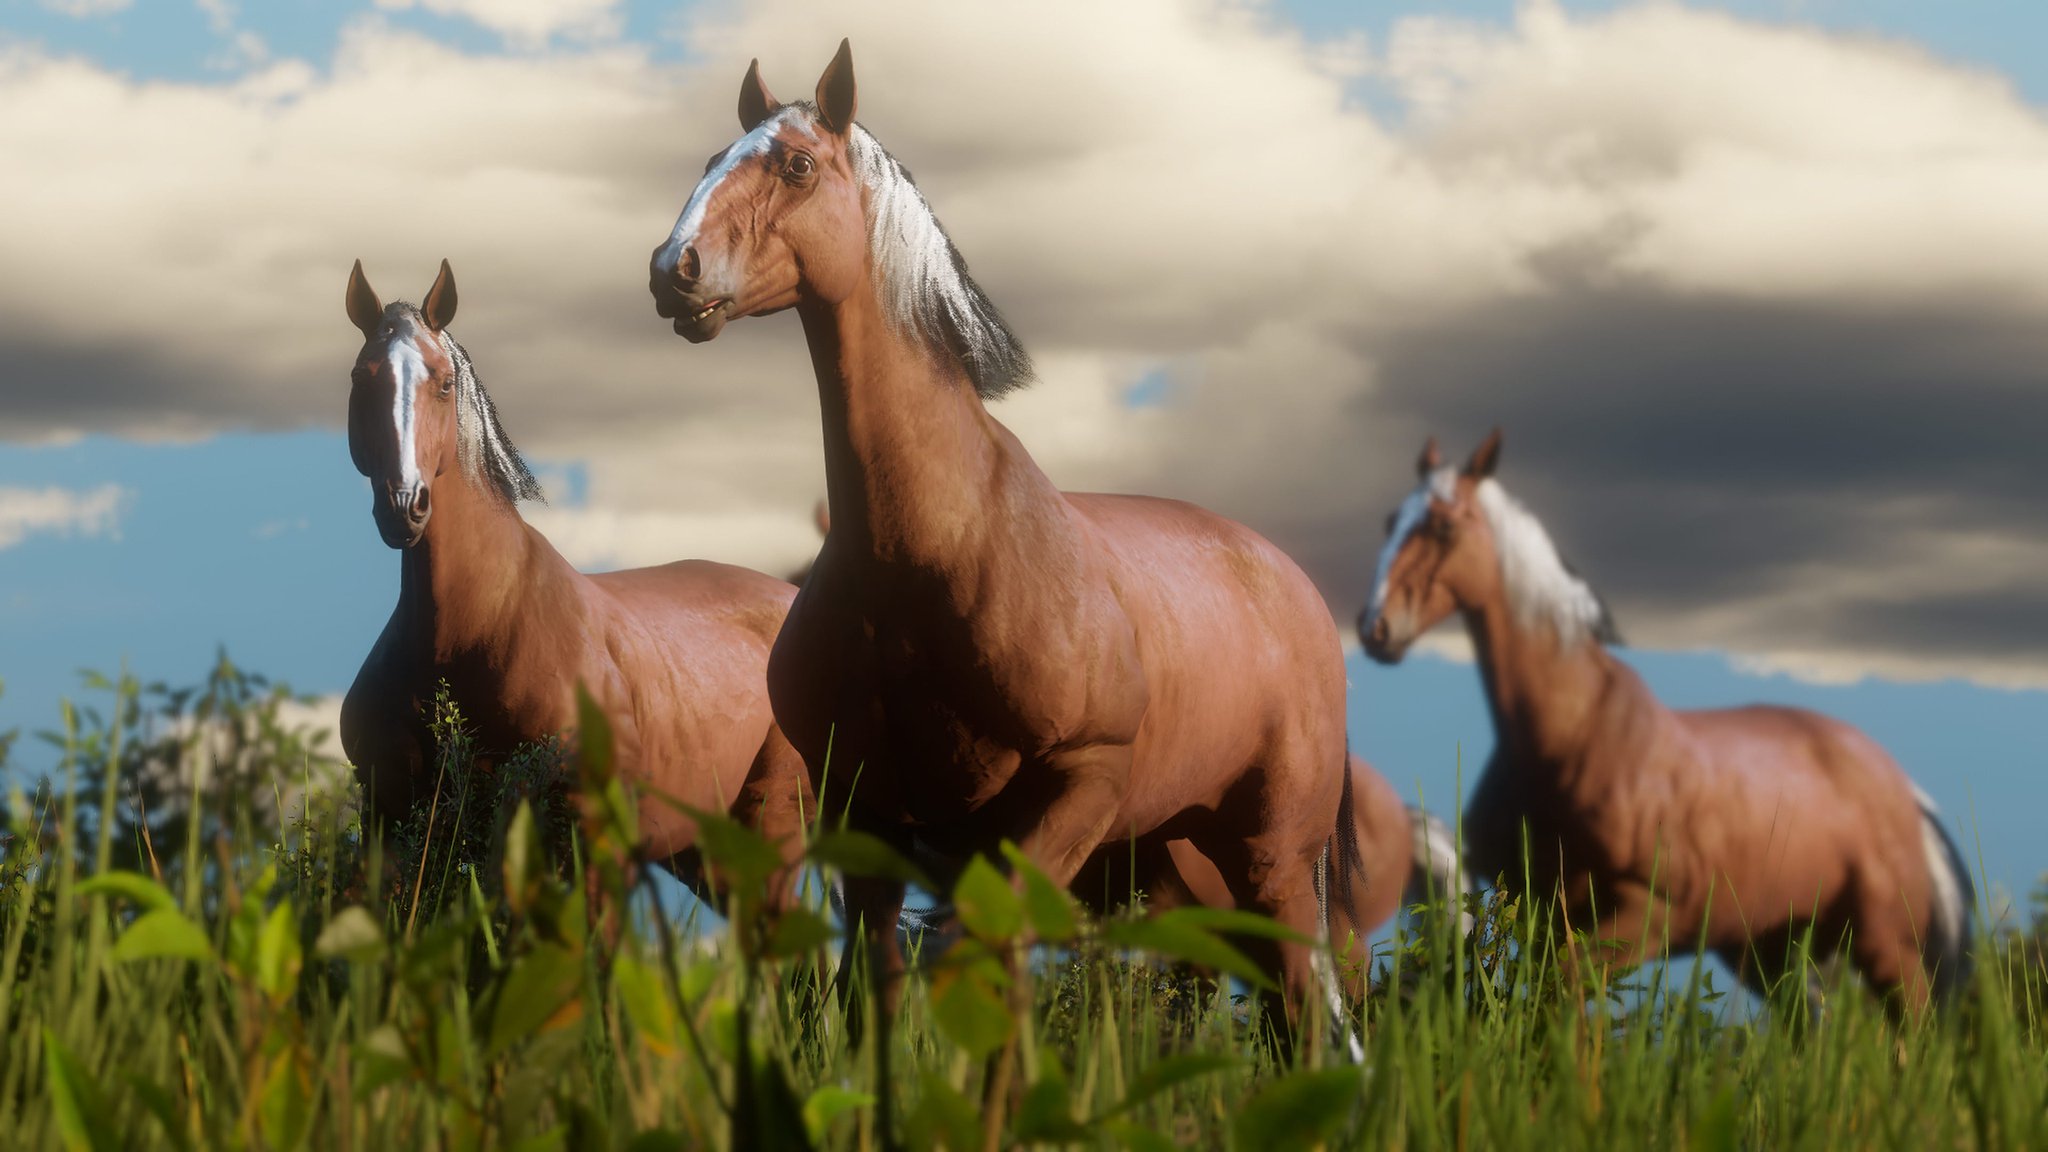 rygrad udgifterne svært Rockstar Games on Twitter: "There are 19 breeds of horse in Red Dead  Redemption 2 from Appaloosas and Arabians to Shires to Mustangs, and each  handles differently with its own characteristics. Horses